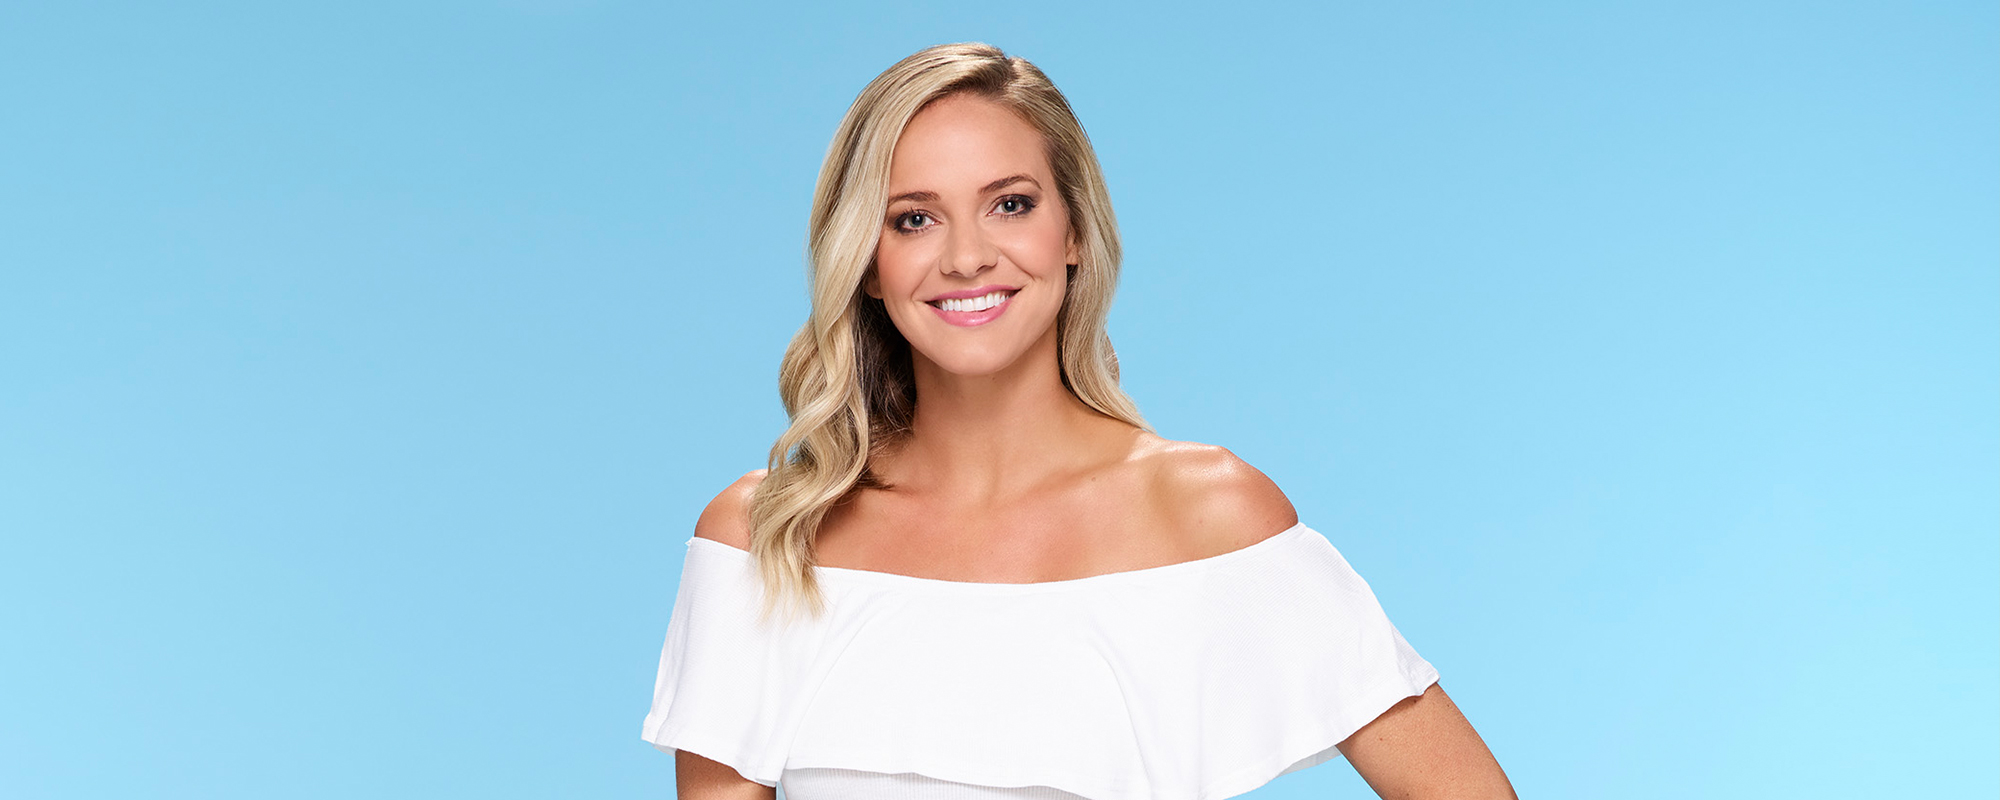 The Bachelor 2017 contestants revealed